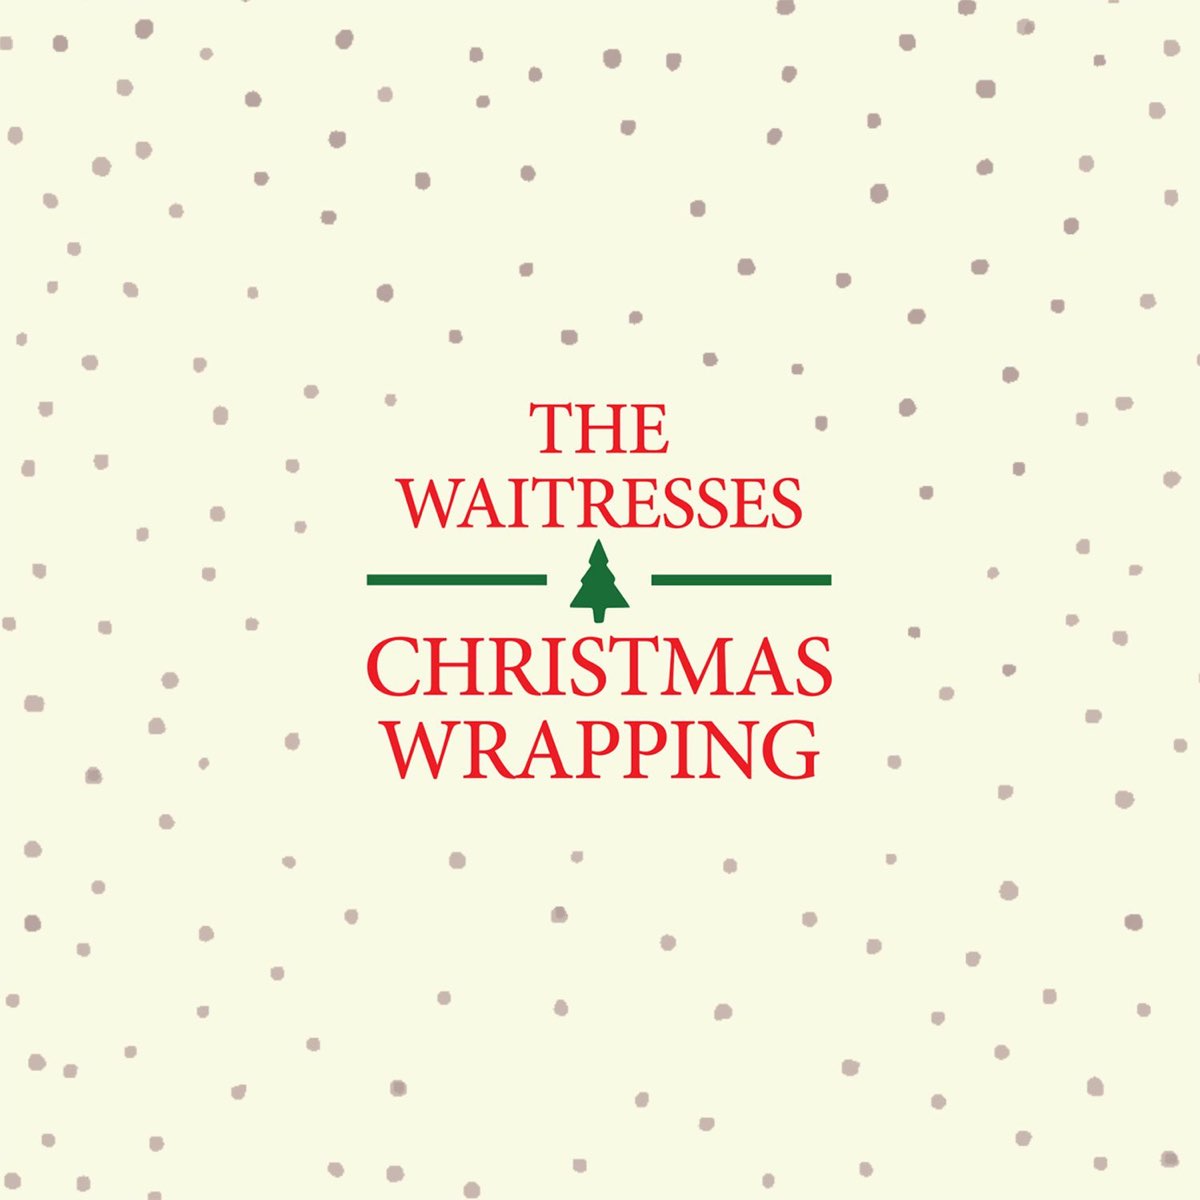 The Waitresses Christmas Wrapping cover artwork